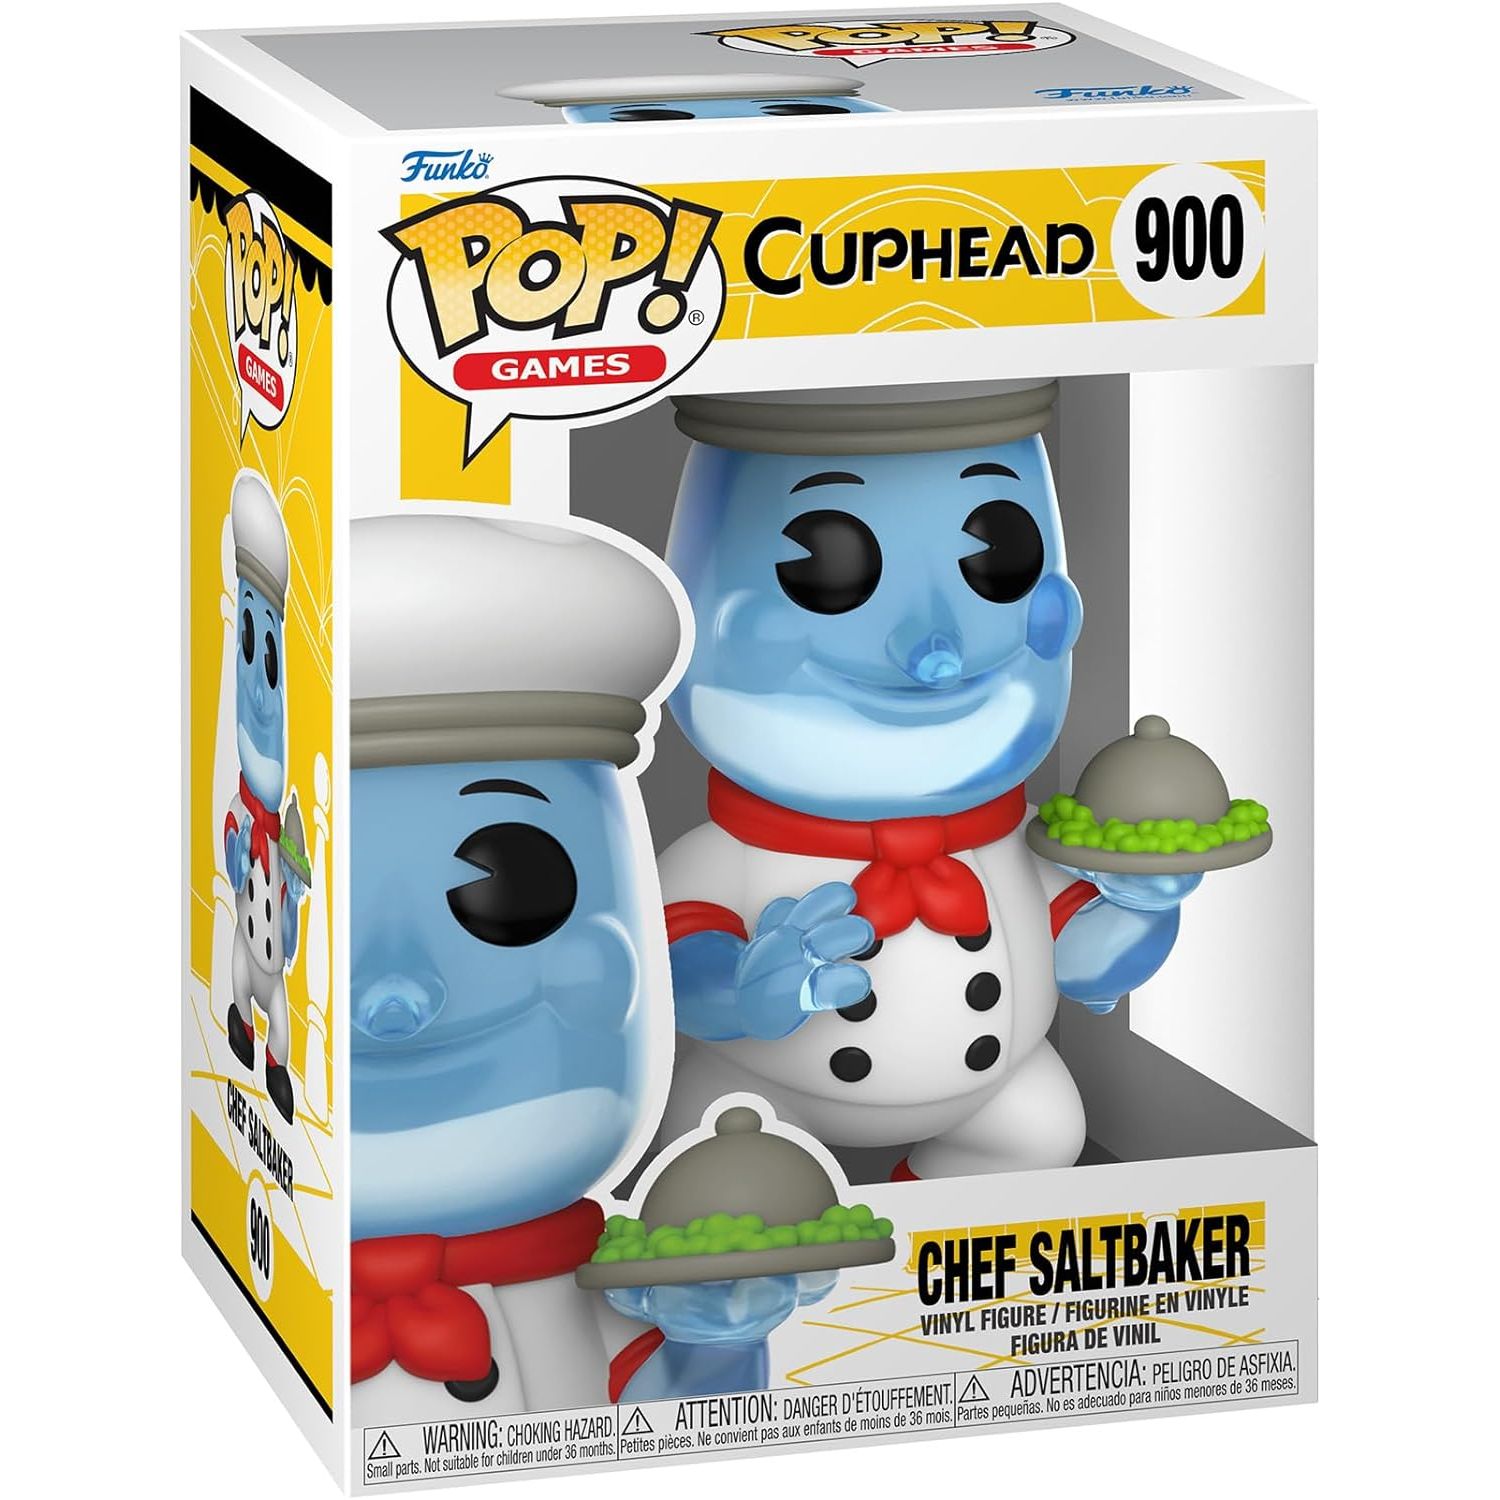 Funko Pop! Games Cuphead - Chef Saltbaker with Chase